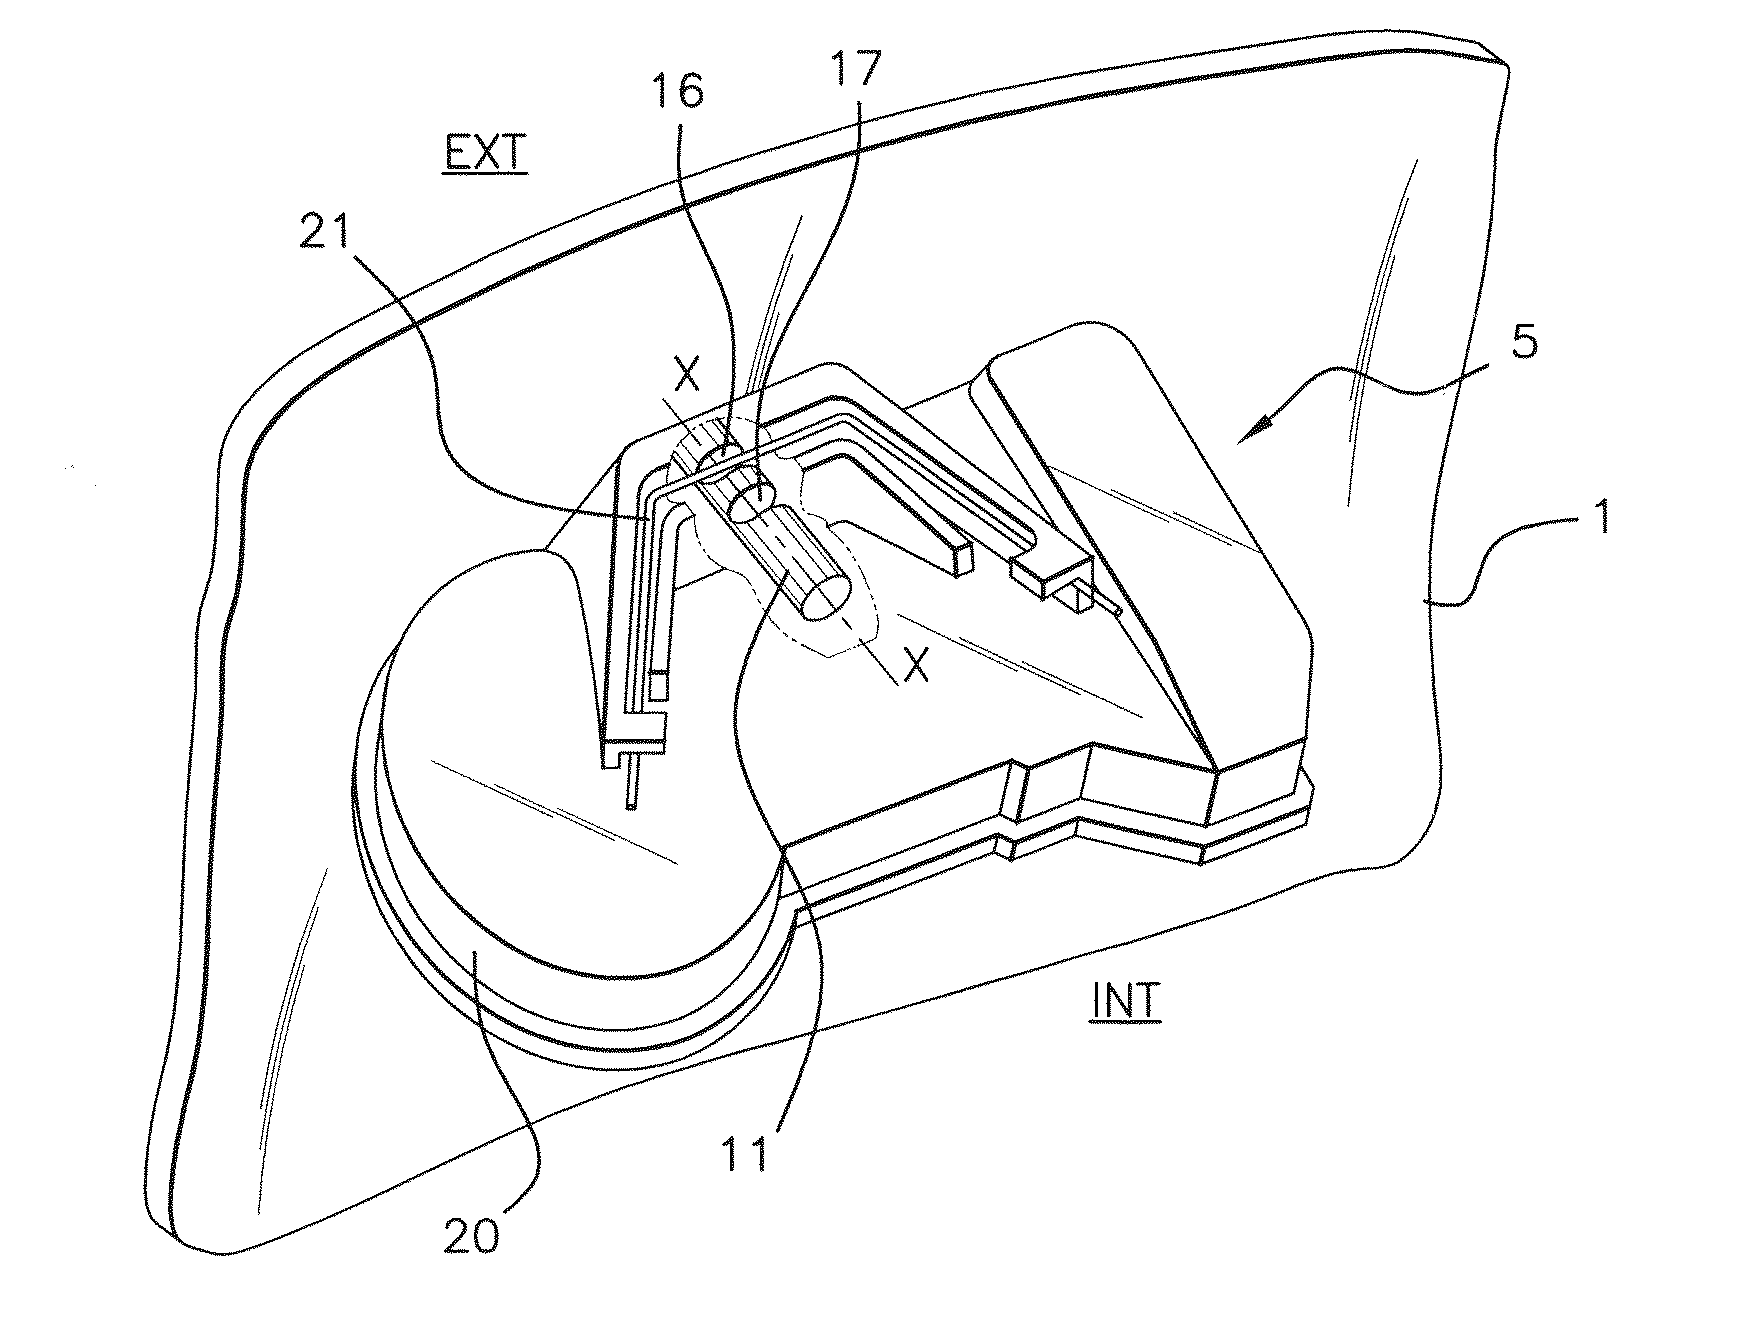 Measurement module and assembly method for such a module on a wheel rim